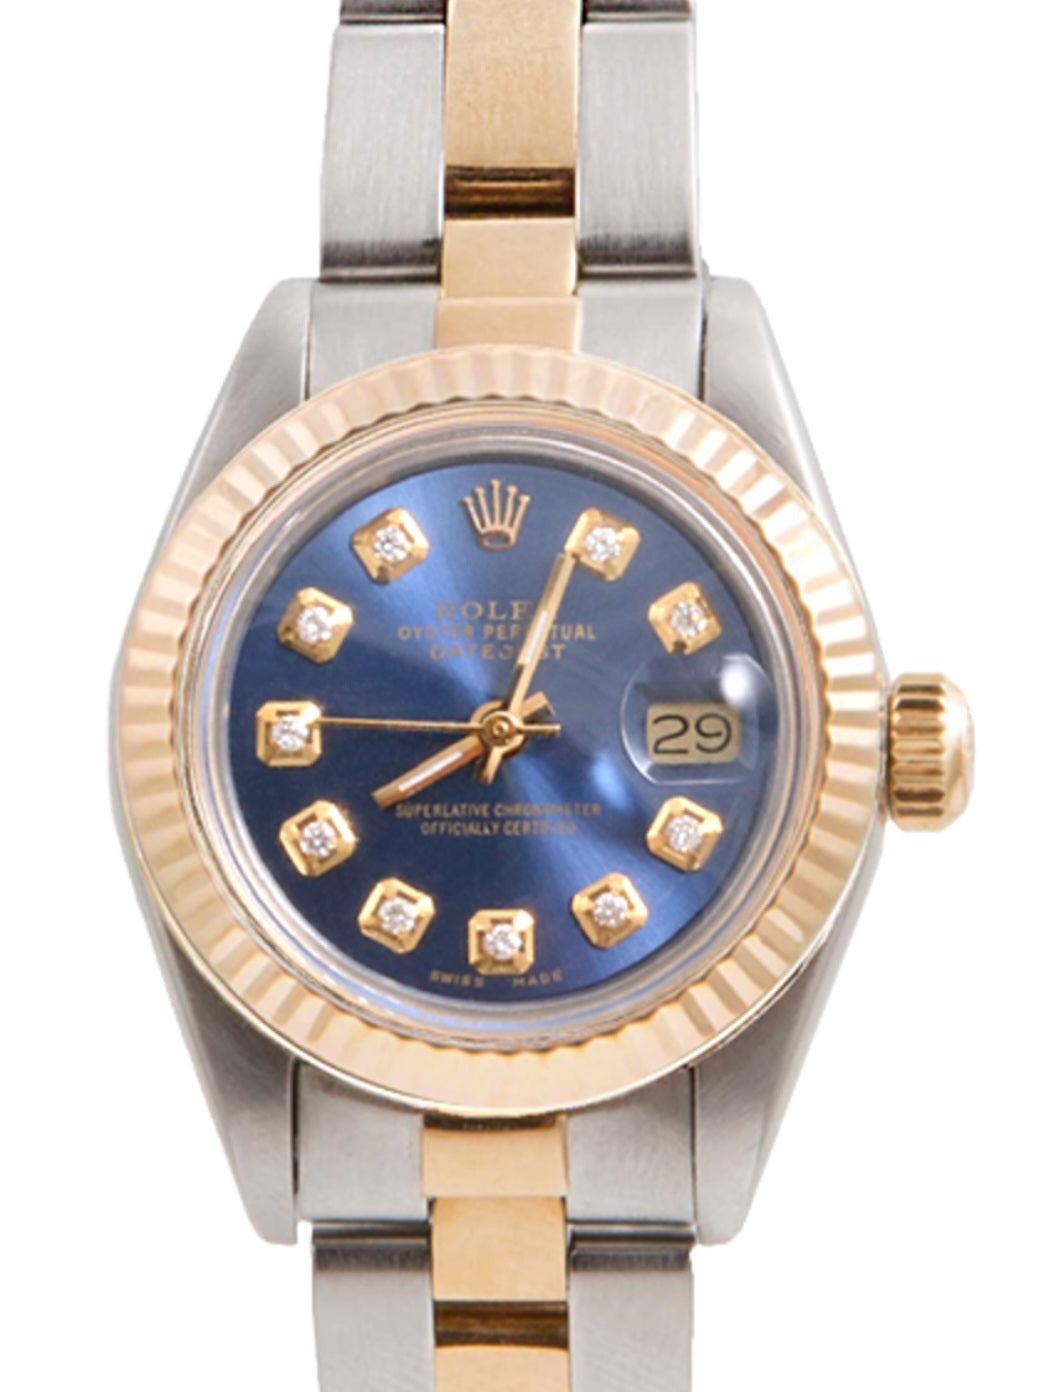 Rolex ladies datejust oyster two tone
26mm flutes, rolex oyster band 
Blue diamond 